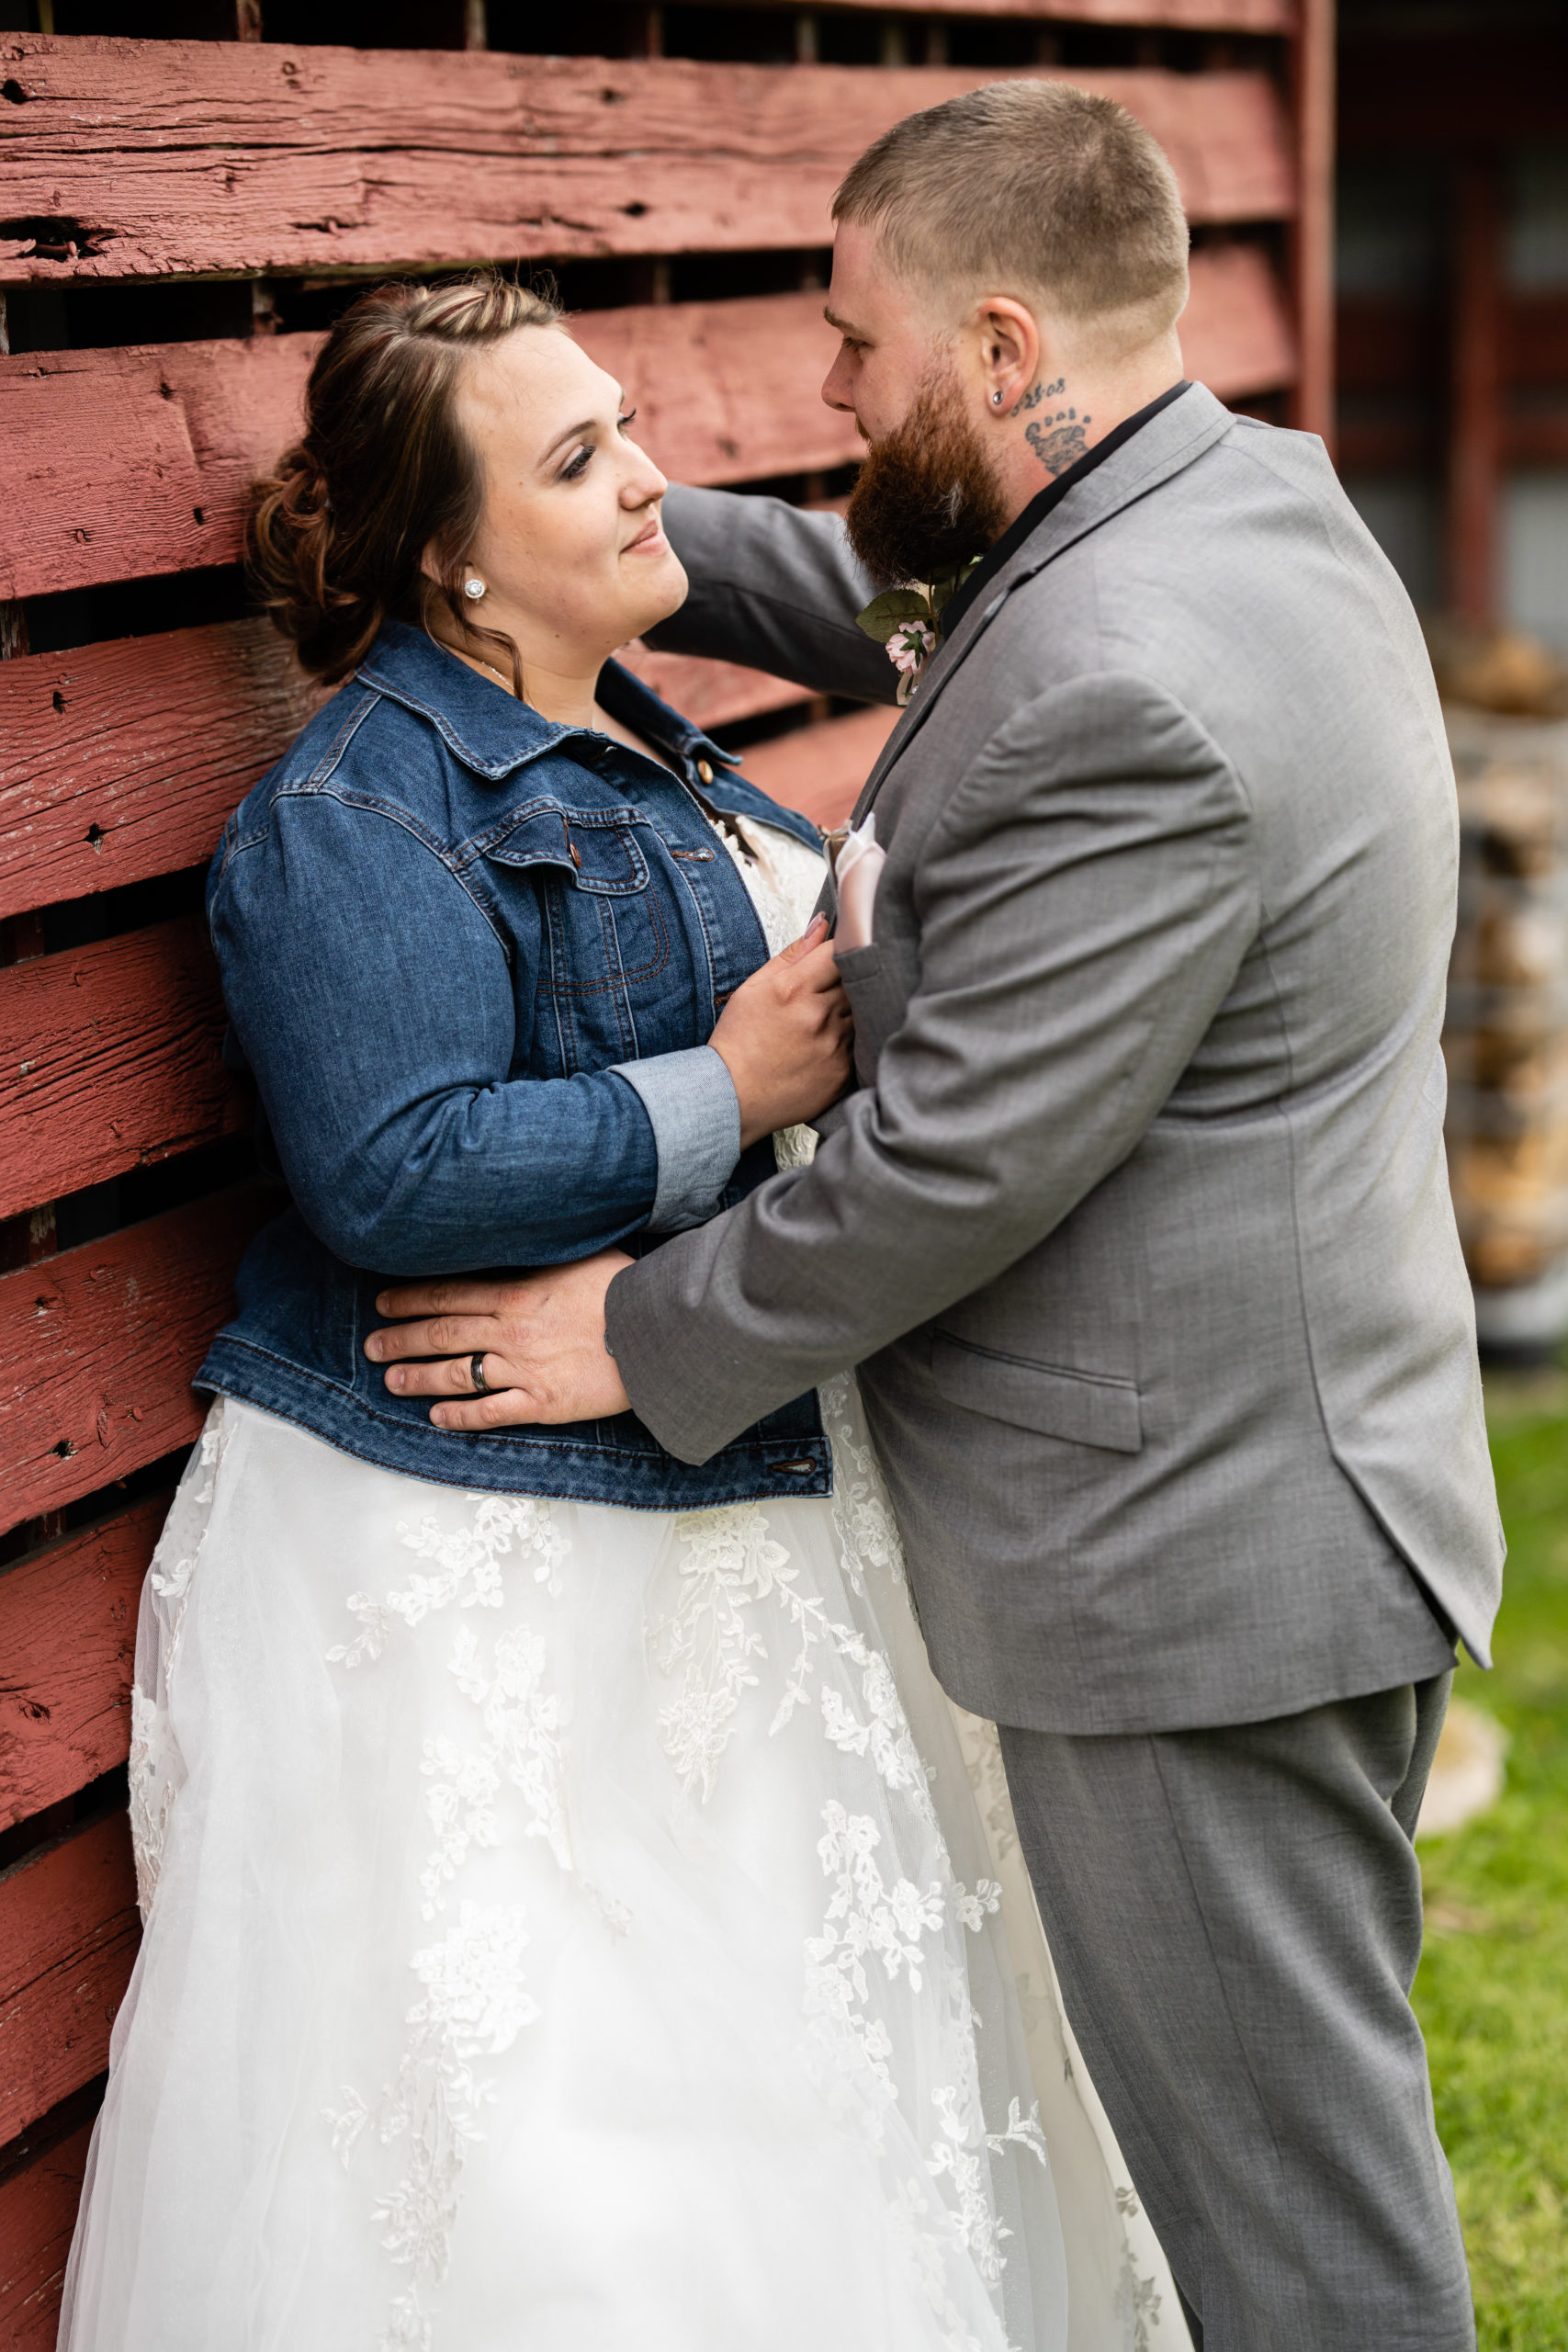 Bride and groom at a barn wedding being photographed by Lisa Wiker Photography Oshkosh Wedding Photographer